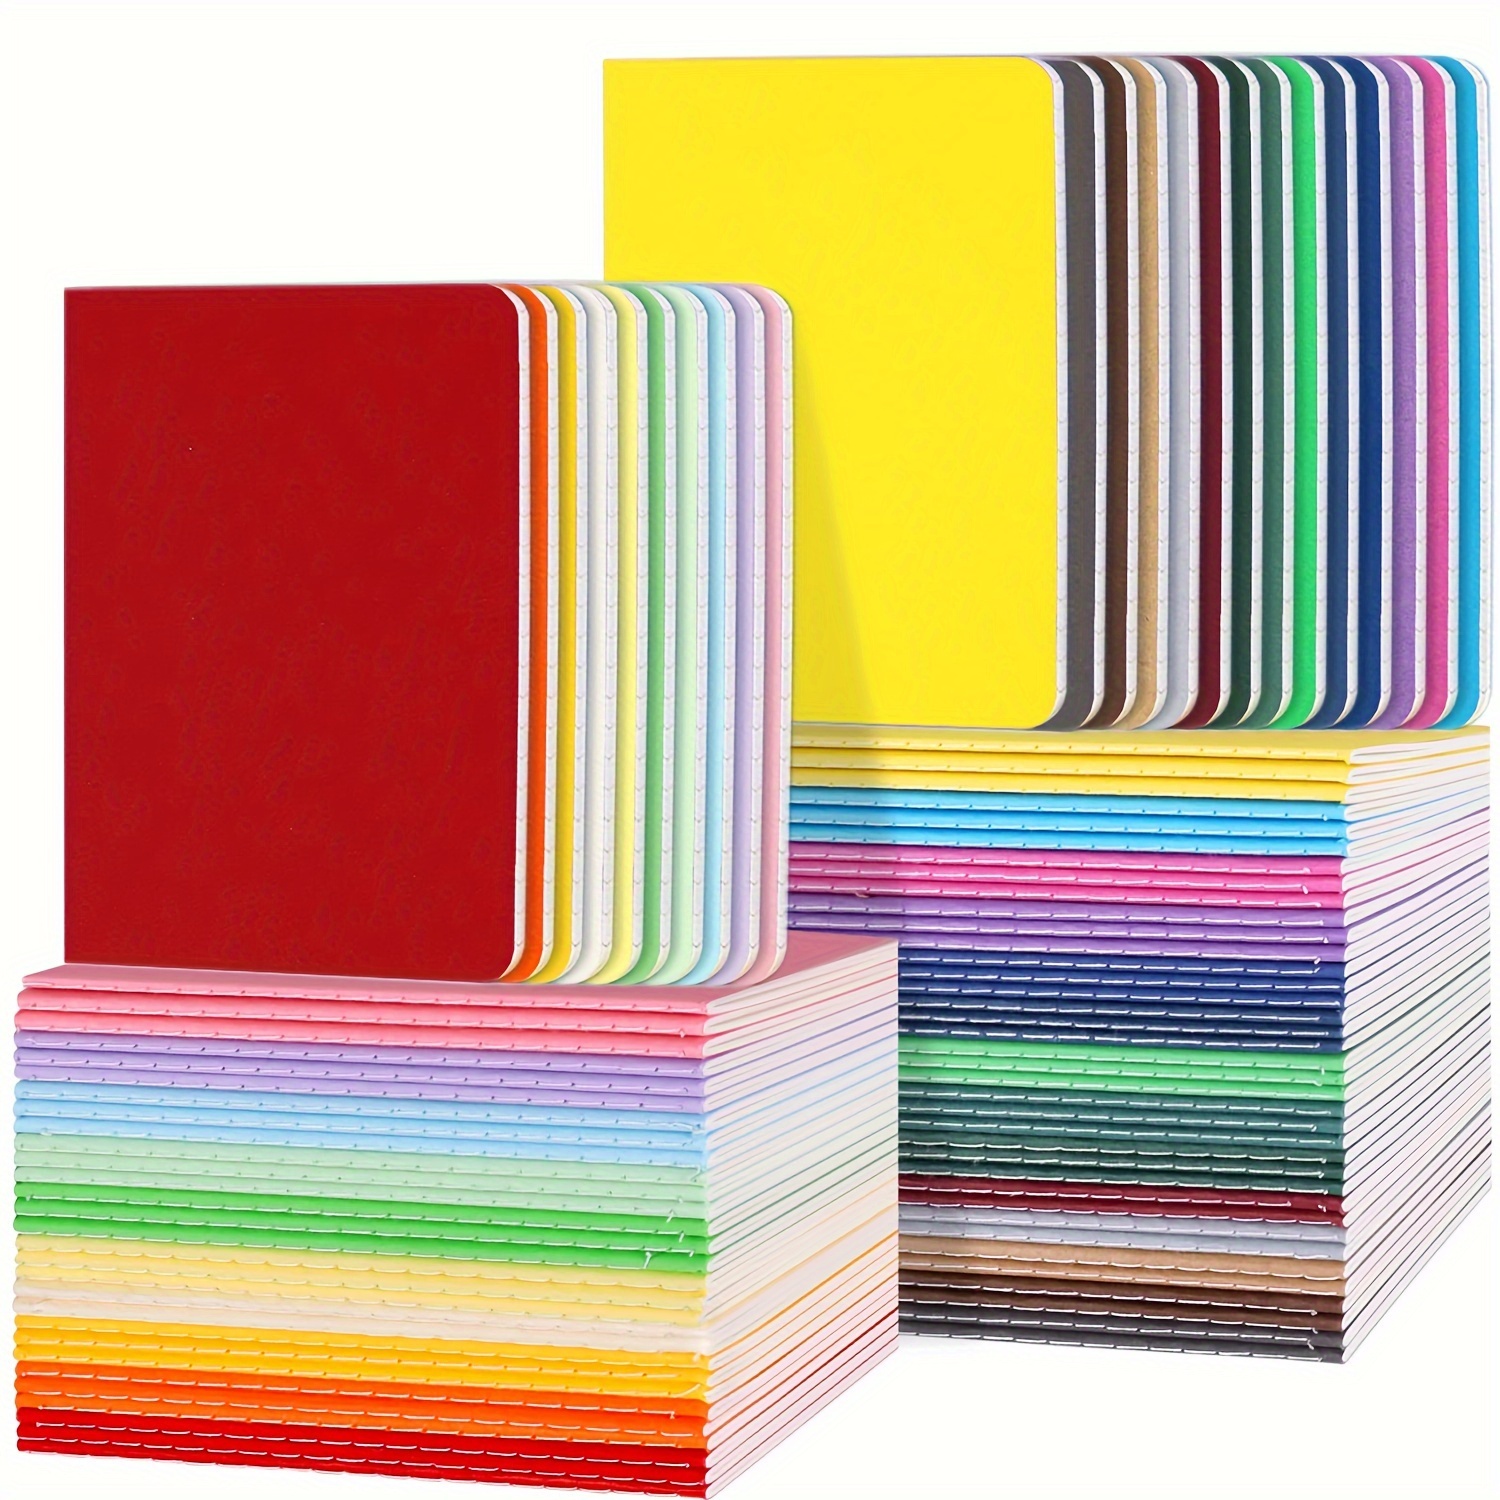 

90-piece Mini Pocket Notebooks - Colorful Lined Journal & Memo Pads, 3.5"x5.5", Assorted Colors For Travelers